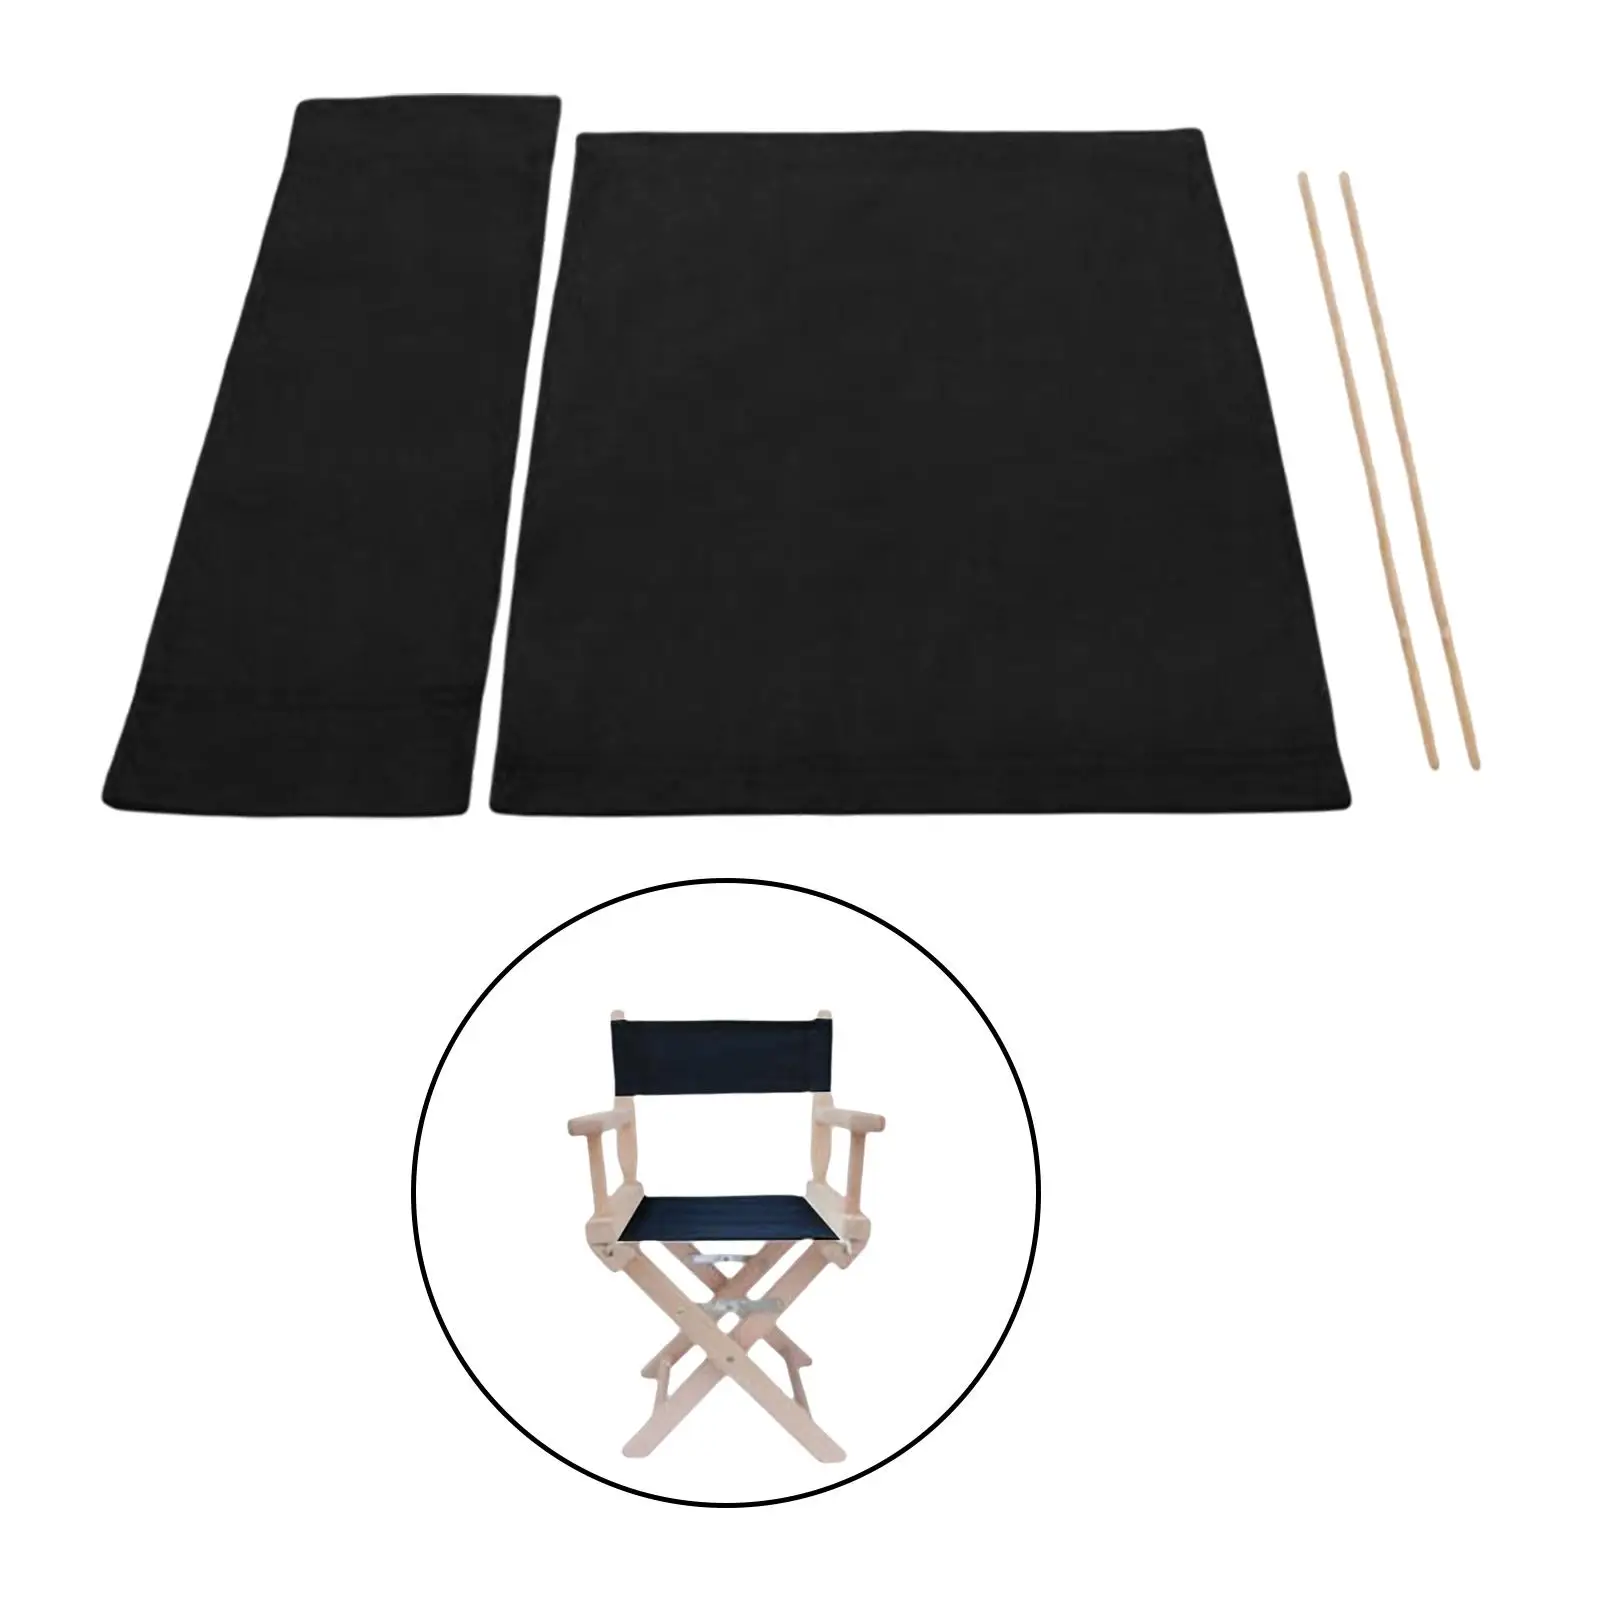 Directors Chairs Cover Easy to Clean Stool Protector Seat and Back Chair Replacement Seat Covers Chair Covers for Movie Chair